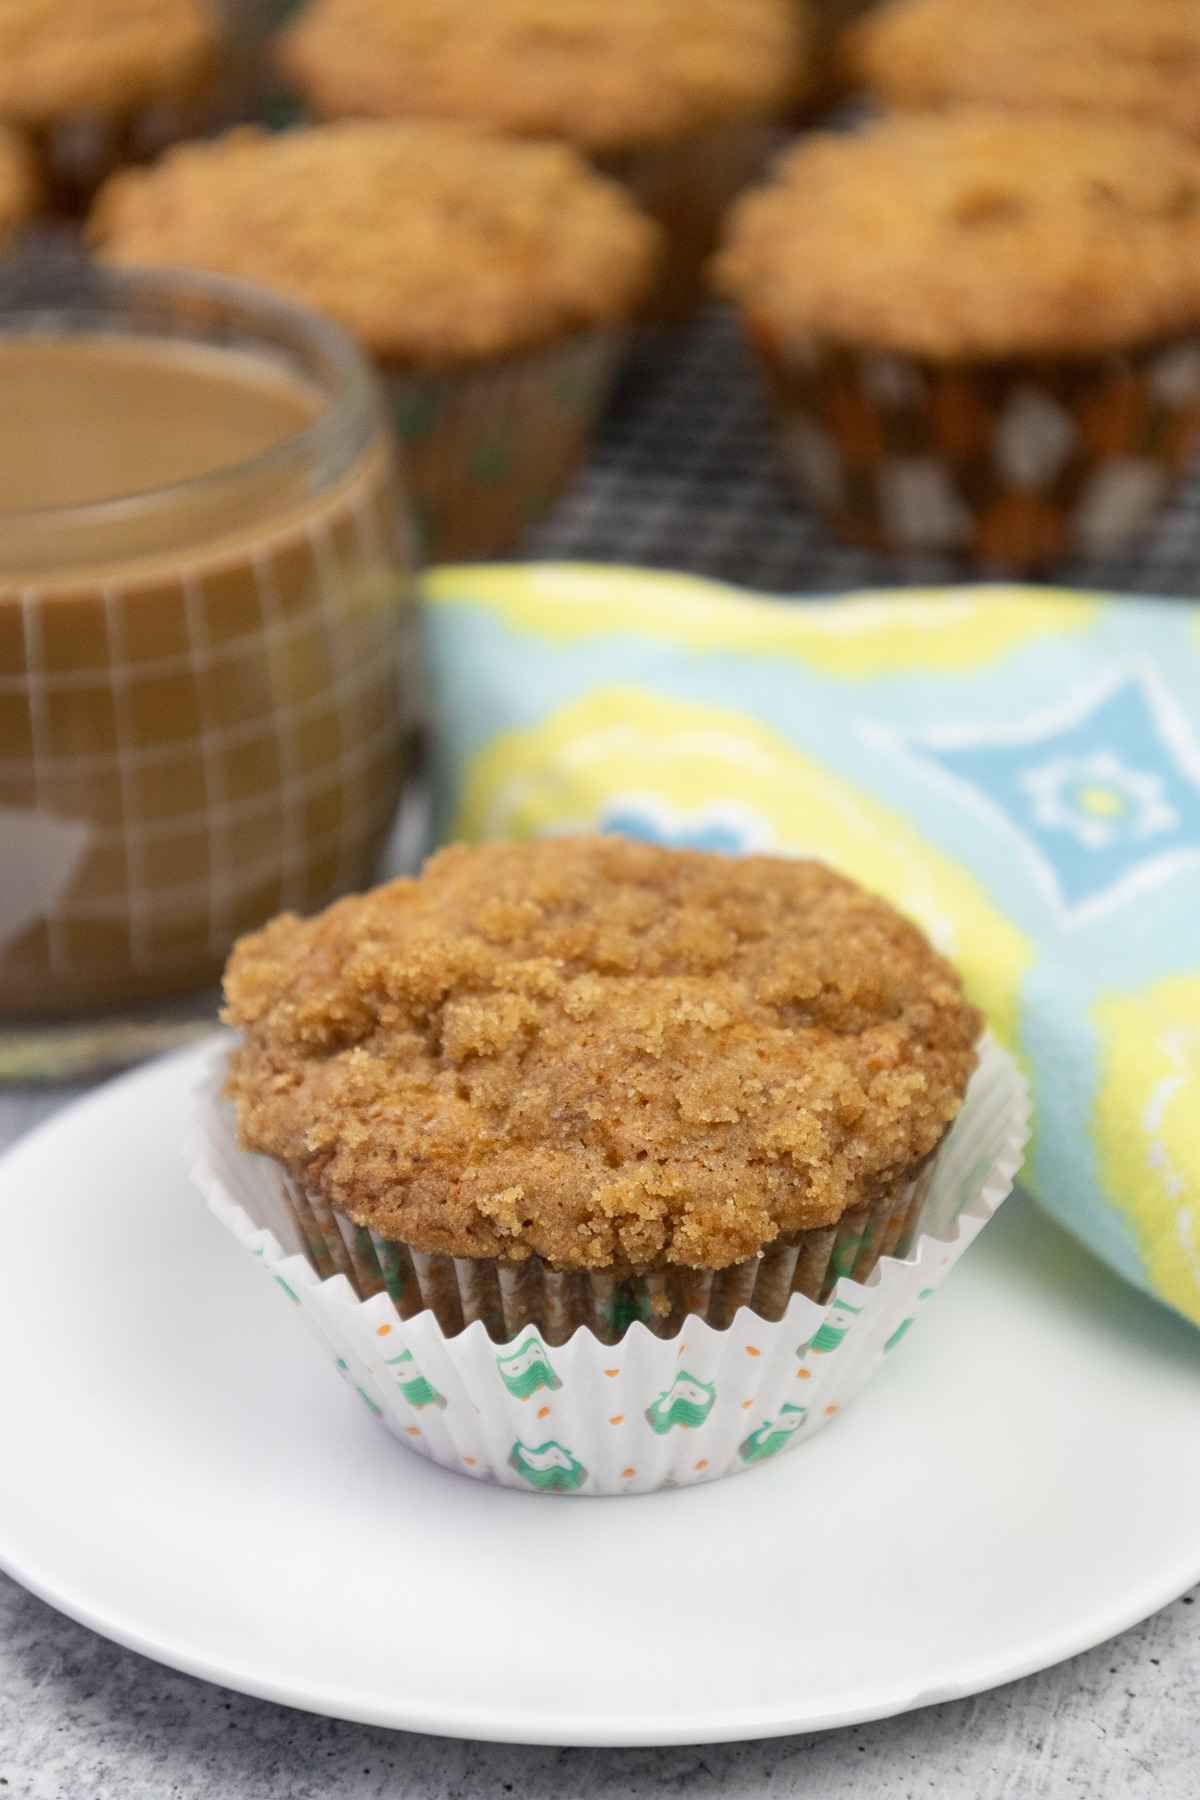 Angled side view of banana crumb muffin in a muffin wrapper on a plate.